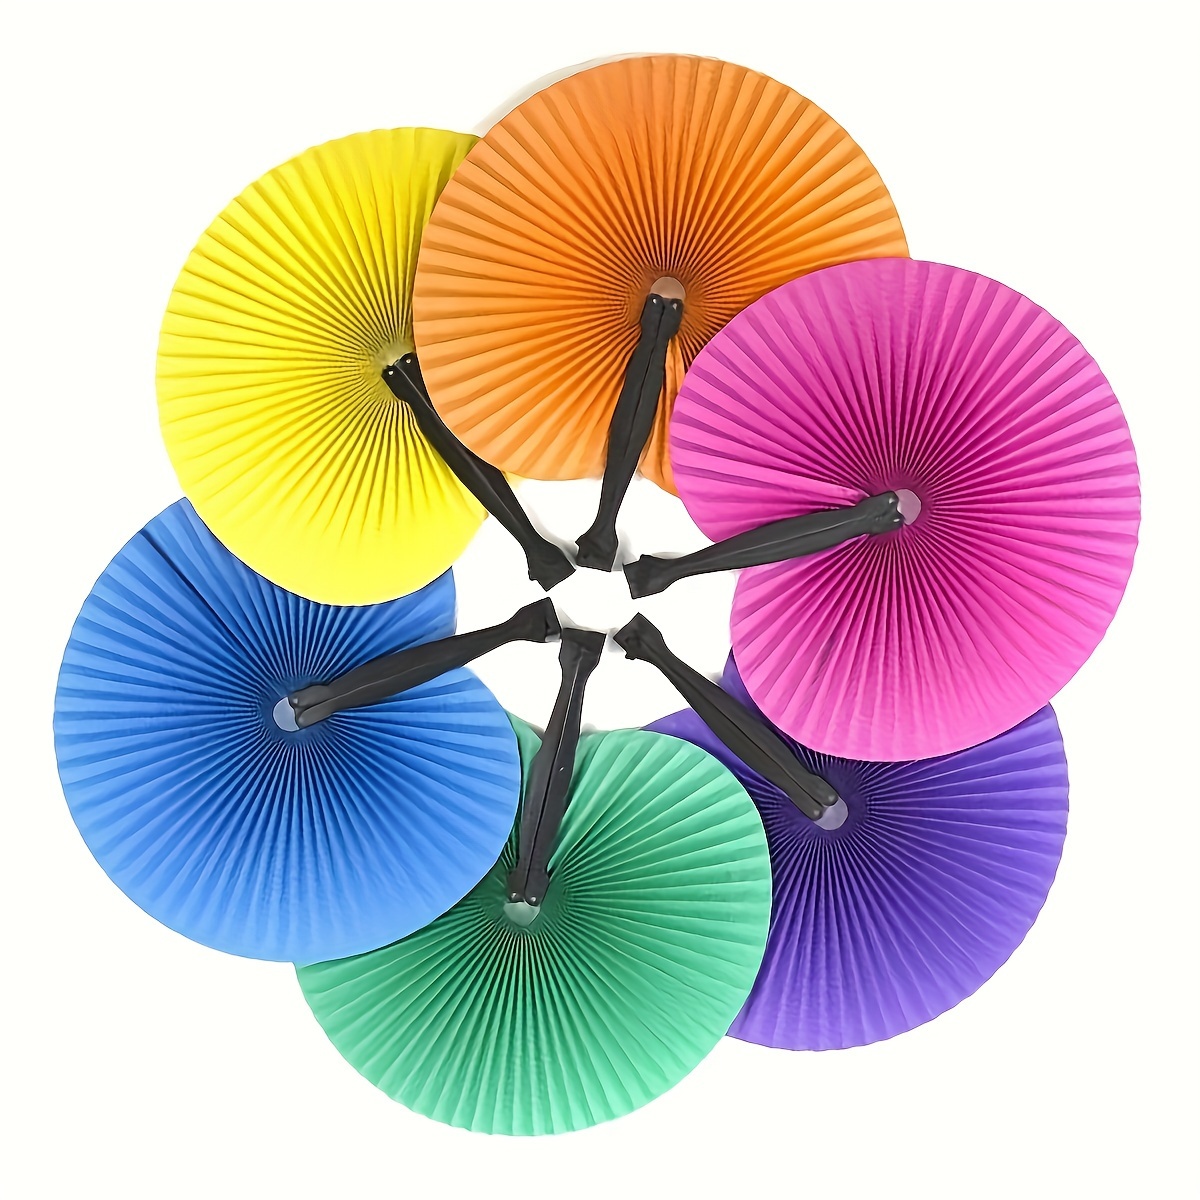 

6 Packs, Round Folding Handheld Paper Fans Accordion Colorful Decorative Fans Assortment For Party Favor Wedding Birthday Celebration Party Supplies